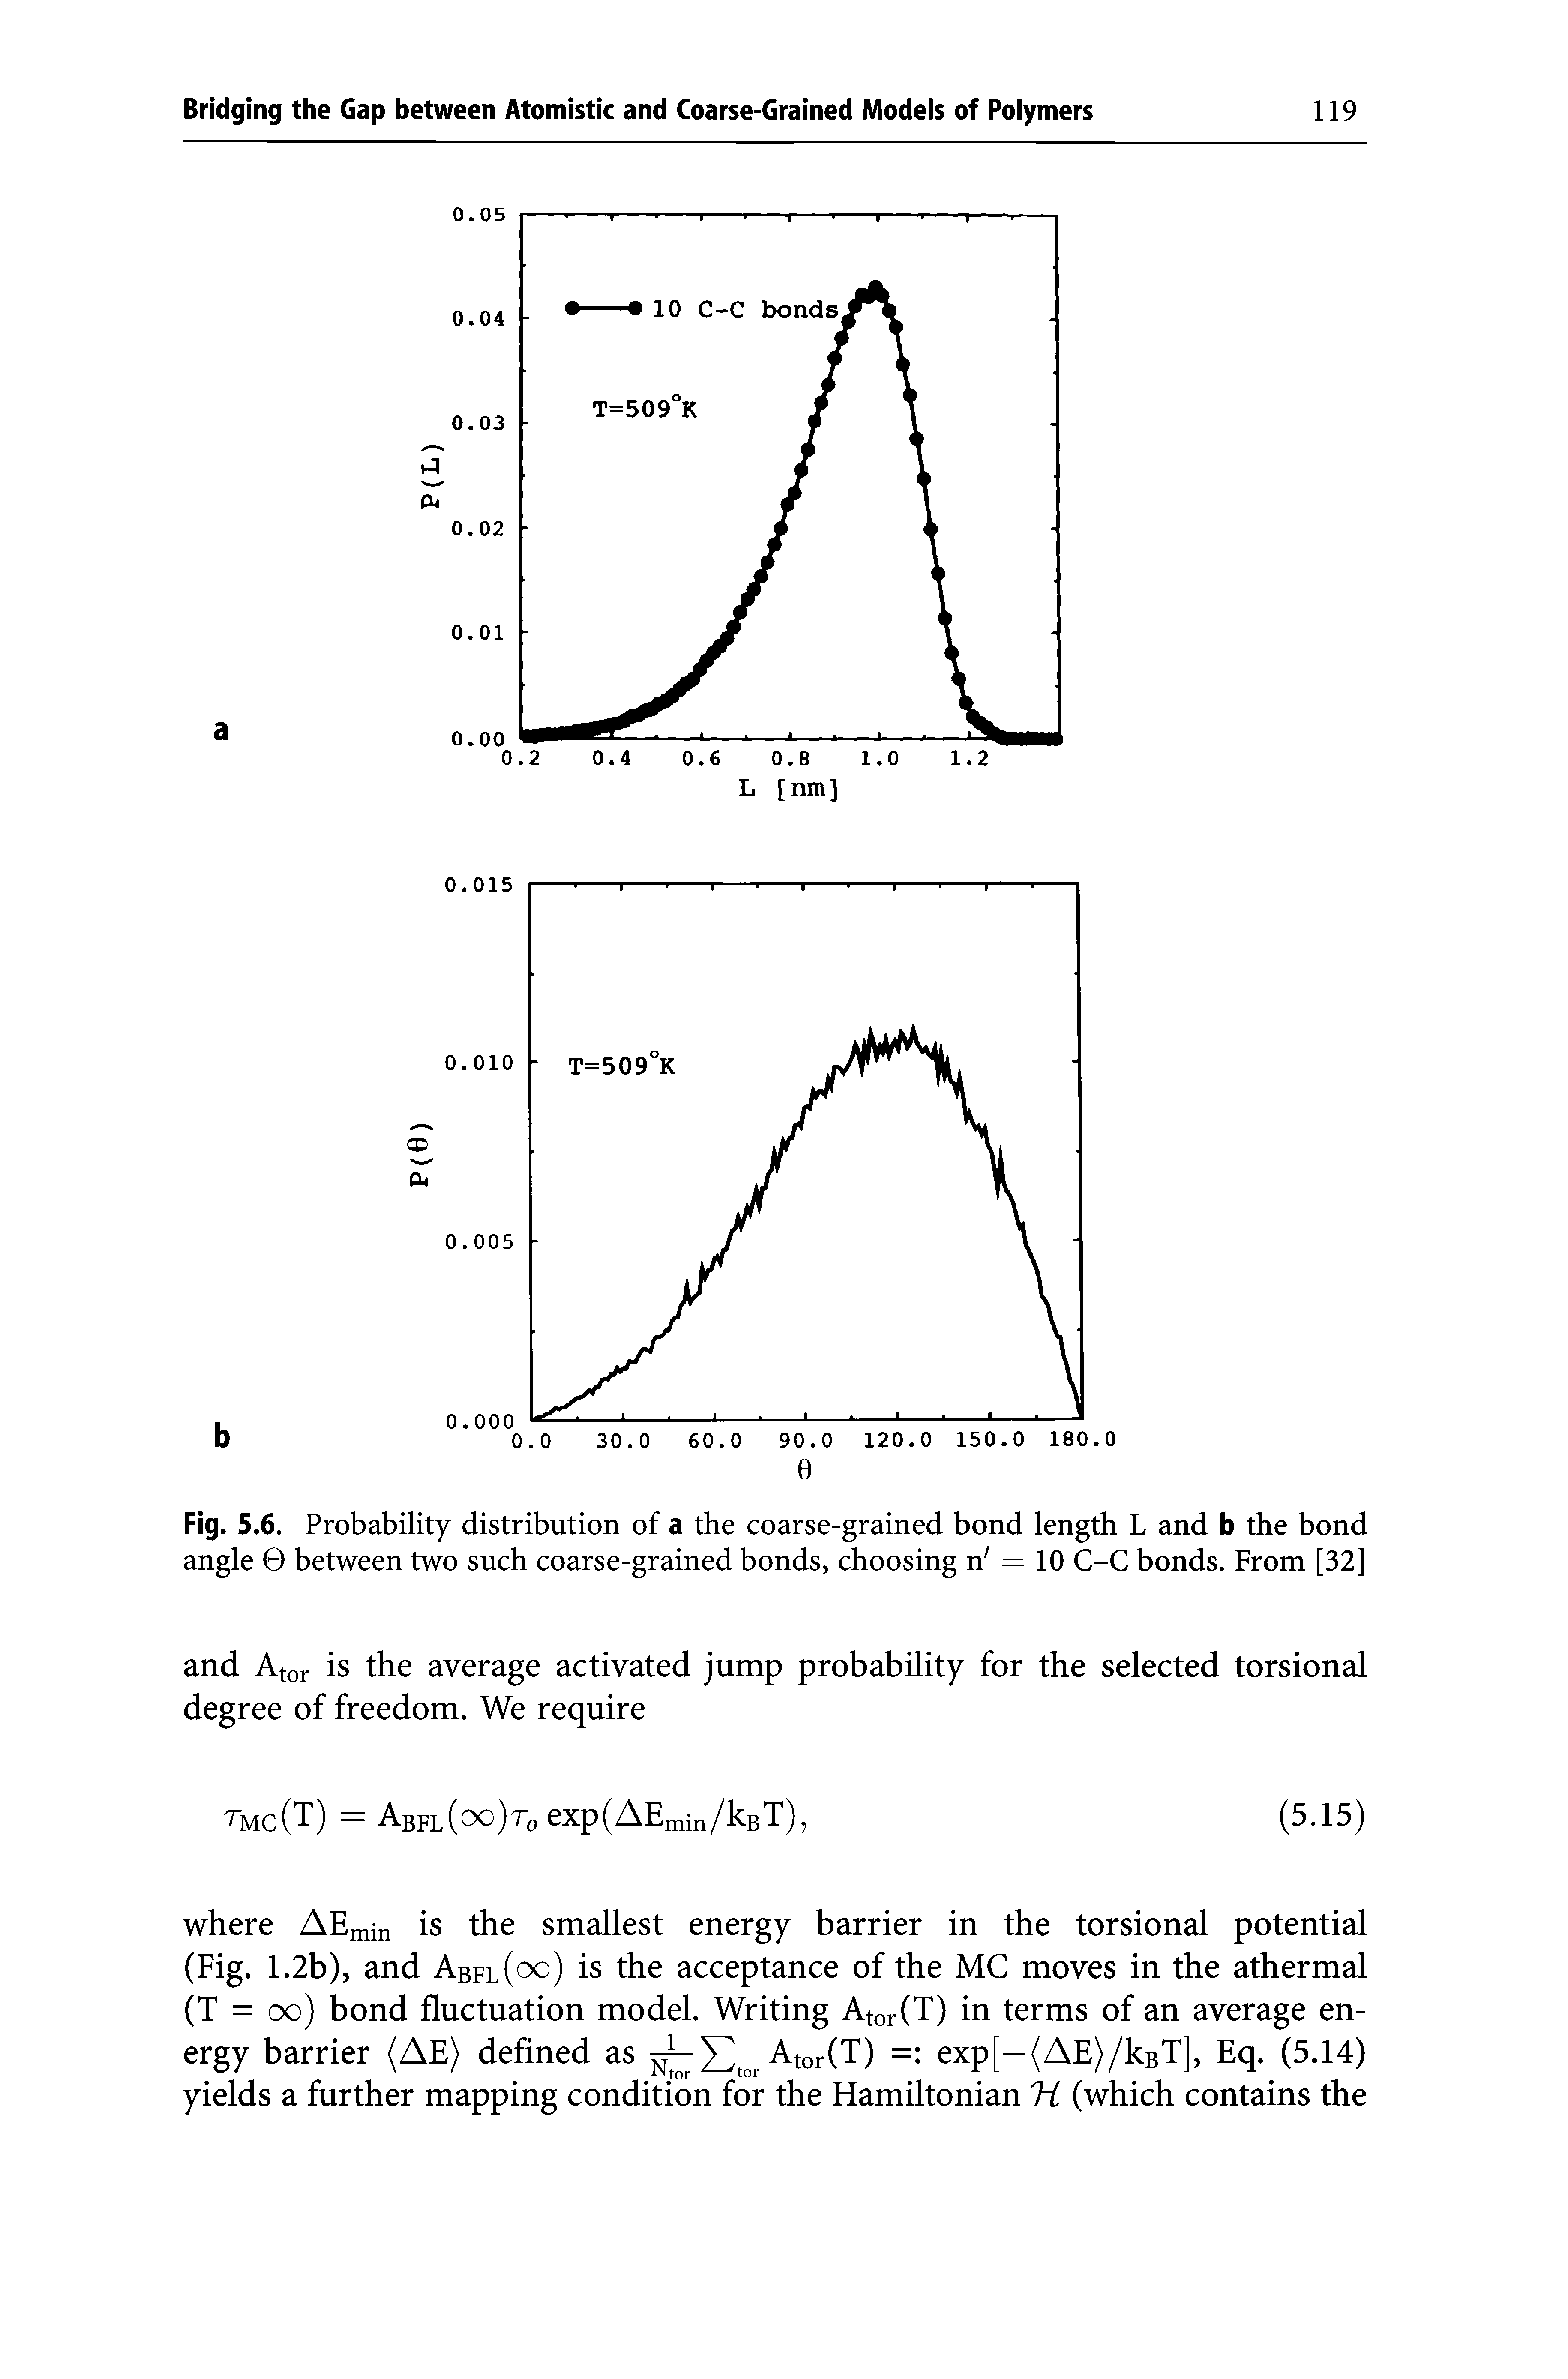 Fig. 5.6. Probability distribution of a the coarse-grained bond length L and b the bond angle 0 between two such coarse-grained bonds, choosing n = 10 C-C bonds. From [32]...